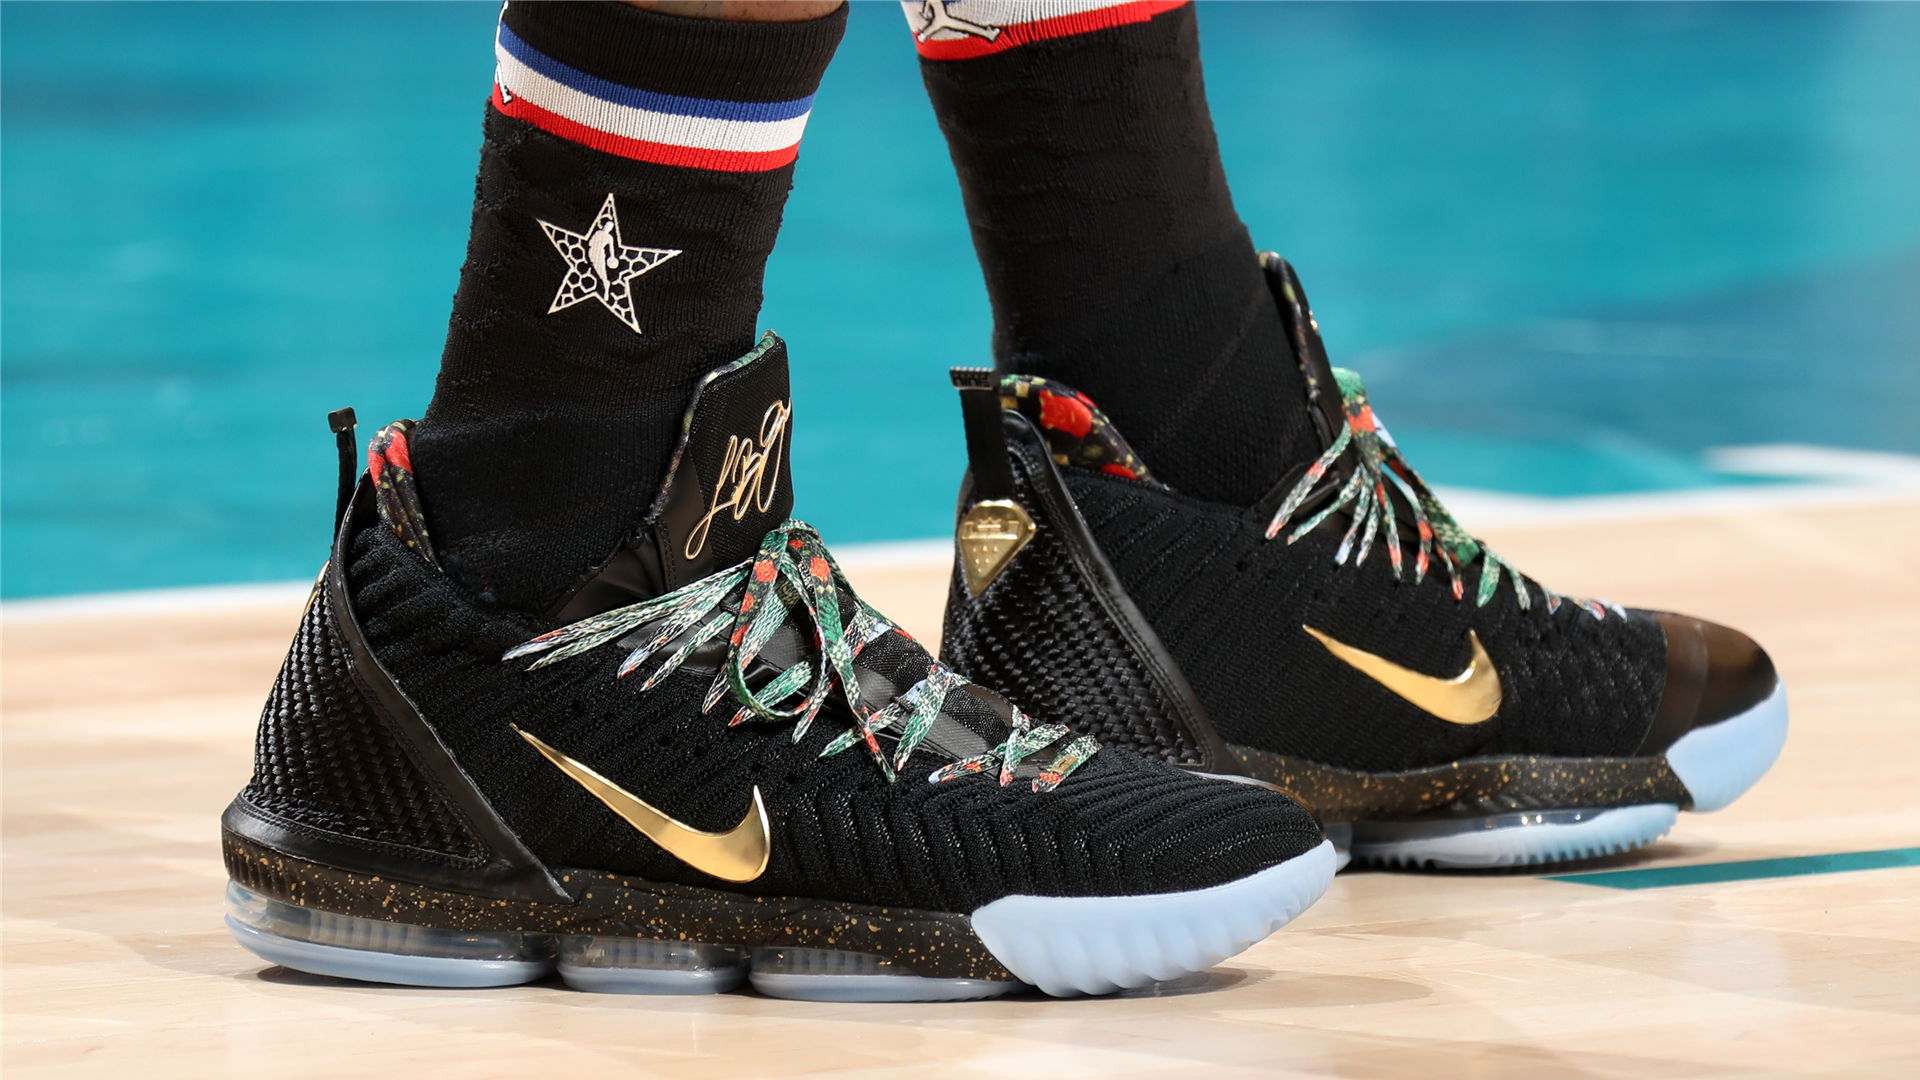 james harden all star shoes 2019